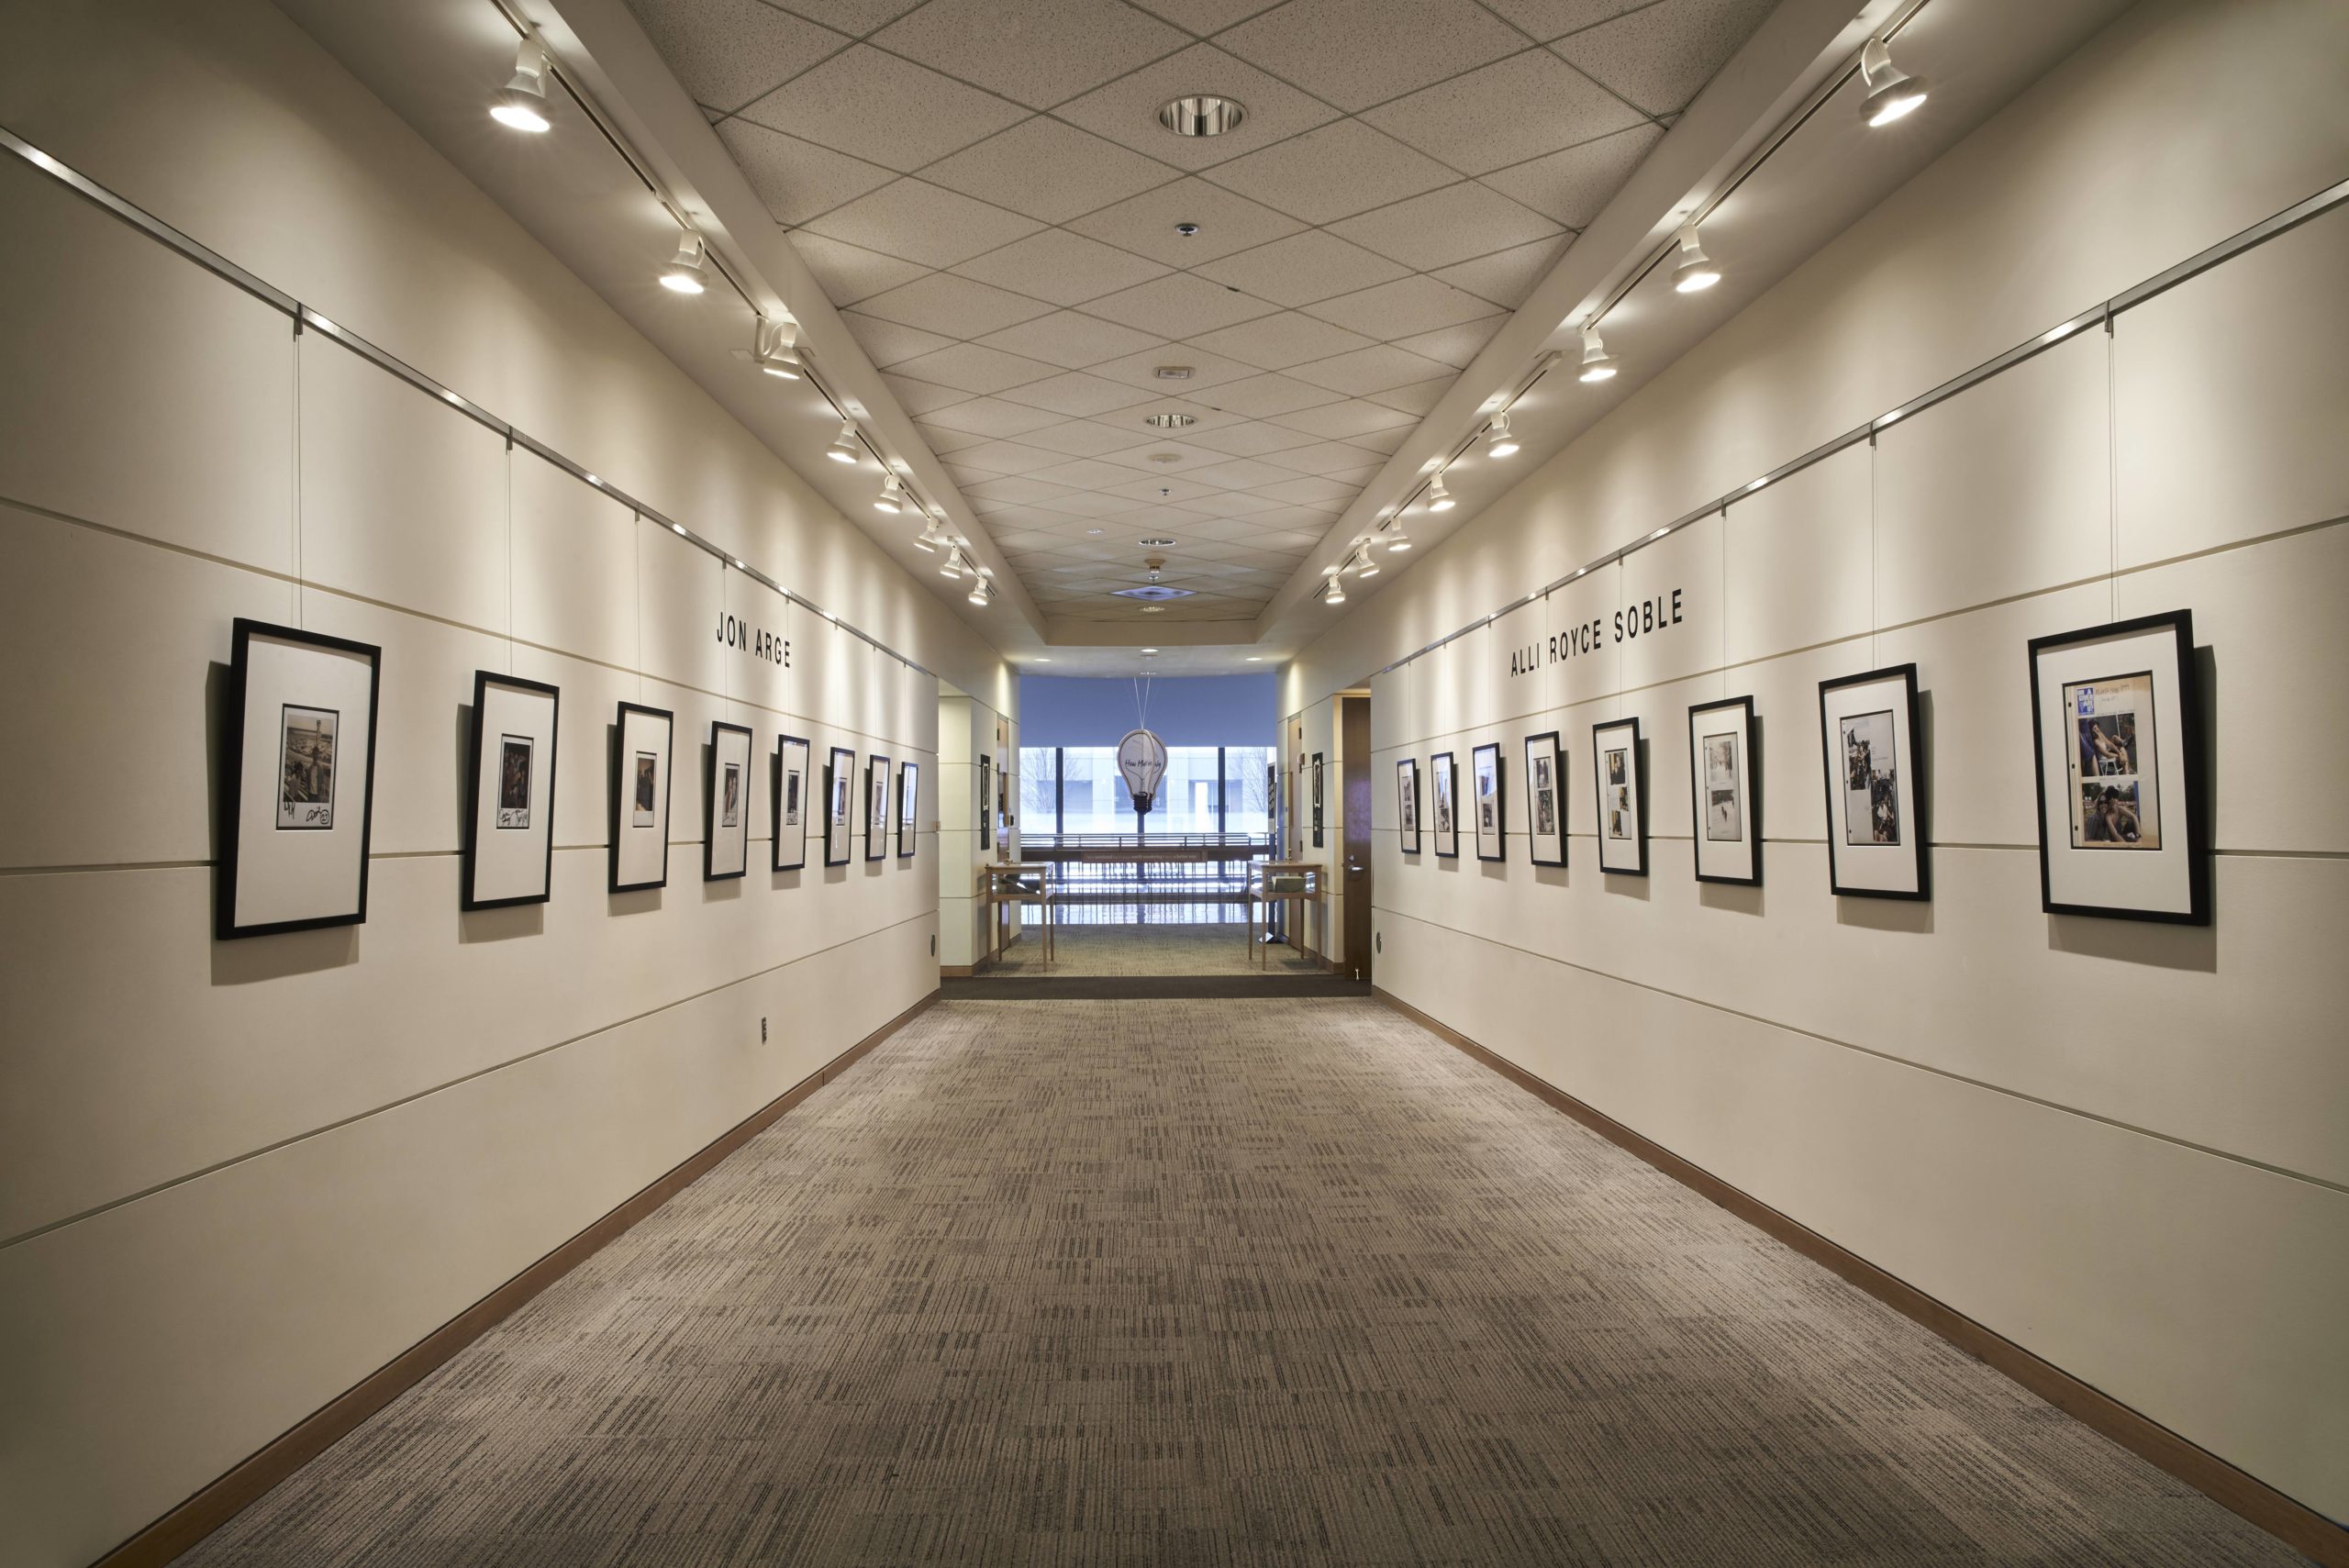 "Our Archives Could Be Your Life" exhibit corridor featuring walls lined with framed Polaroid photographs and scrapbook pages